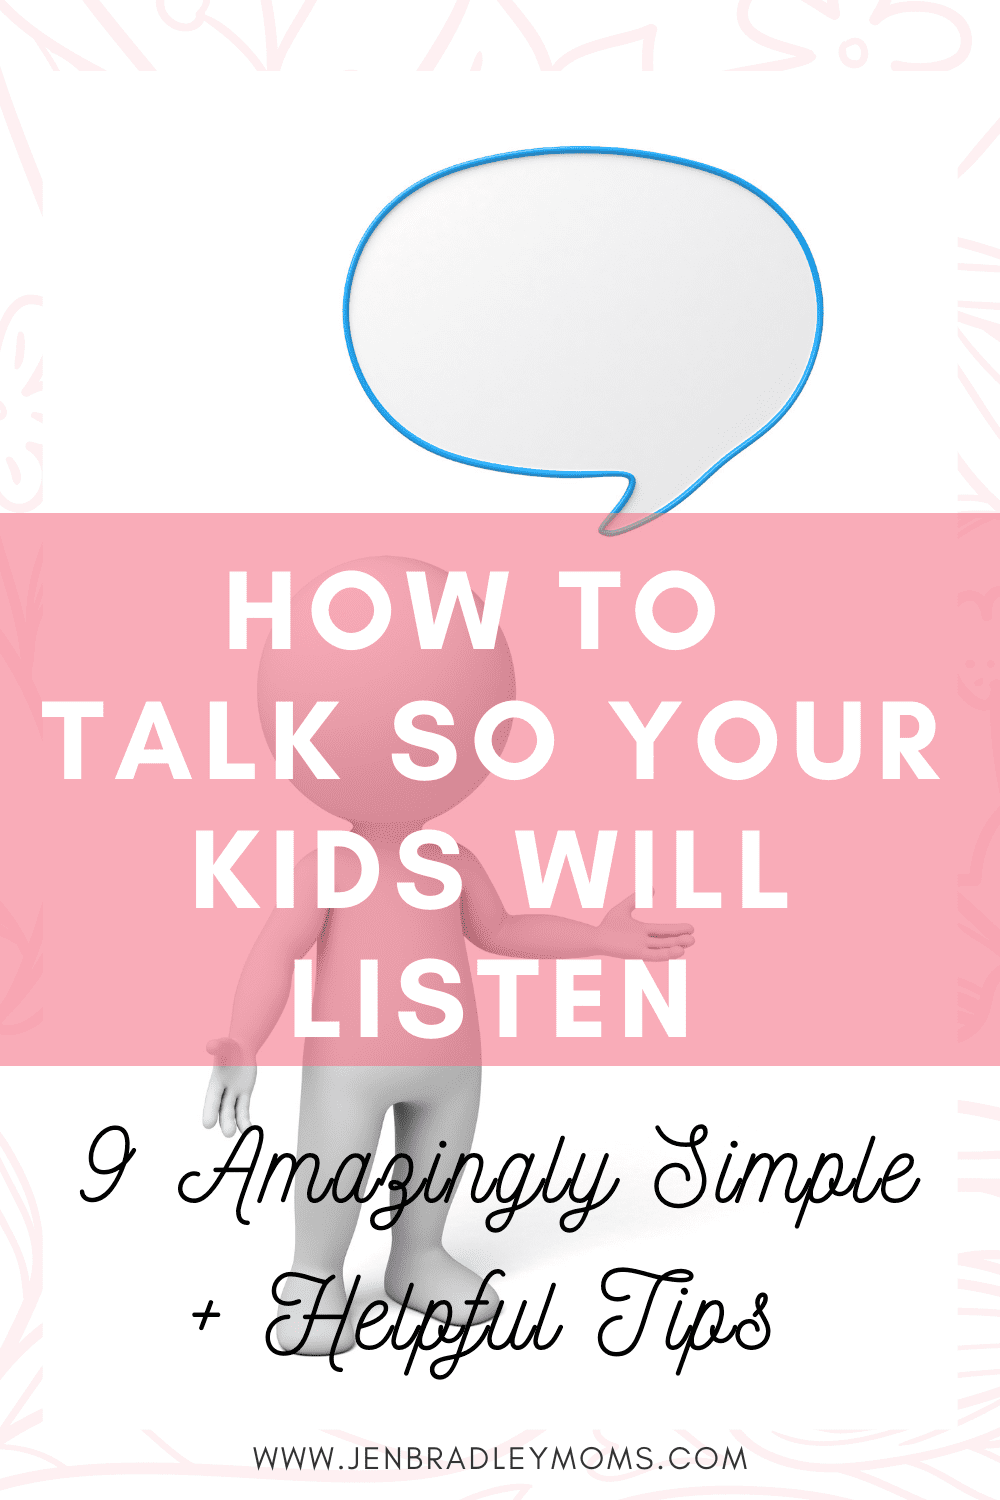 How to Talk So Your Kids Will Listen - 9 Amazingly Simple and Helpful Tips